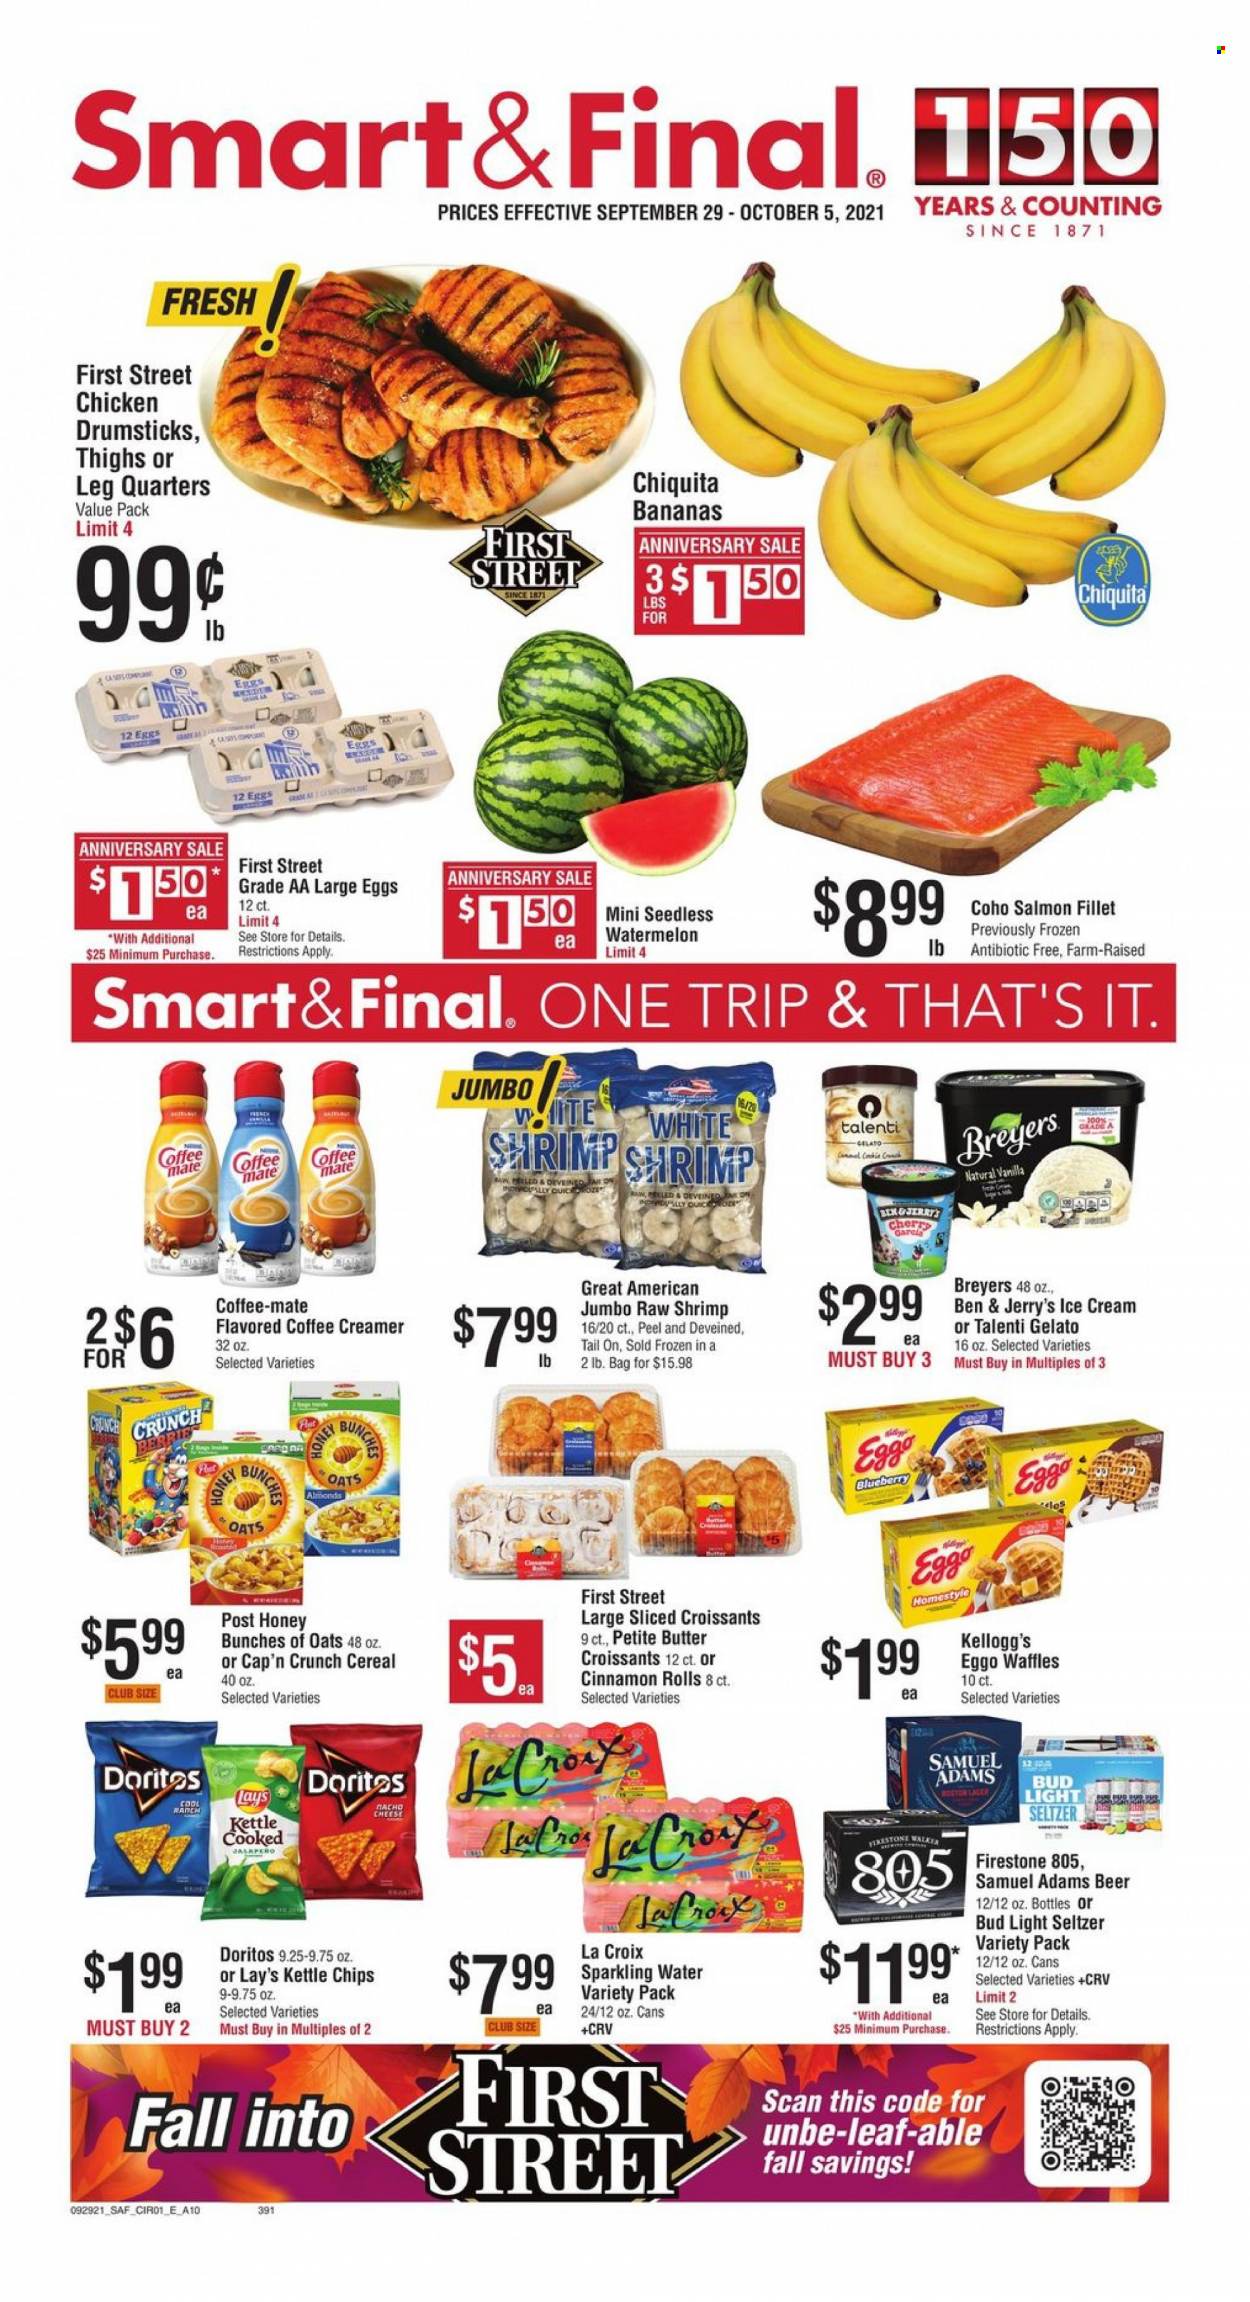 thumbnail - Smart & Final Flyer - 09/29/2021 - 10/05/2021 - Sales products - croissant, cinnamon roll, waffles, jalapeño, watermelon, cherries, salmon, salmon fillet, shrimps, cheese, Coffee-Mate, large eggs, creamer, ice cream, Ben & Jerry's, Talenti Gelato, gelato, Kellogg's, Doritos, Lay’s, cereals, Cap'n Crunch, sparkling water, Hard Seltzer, beer, Bud Light, chicken drumsticks. Page 1.